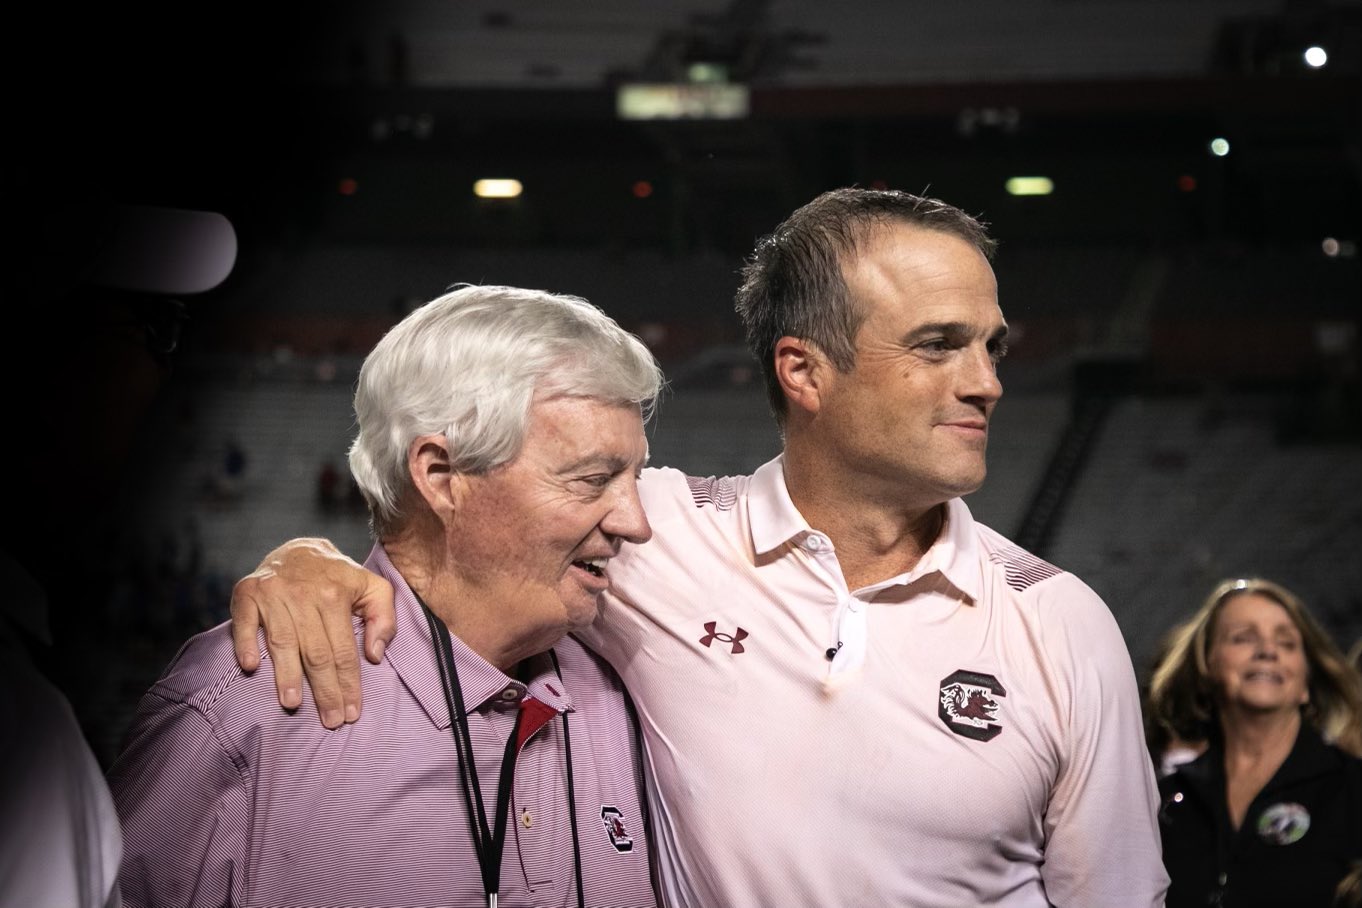 Happy Birthday to a legend who looks GREAT in garnet, Frank Beamer! 